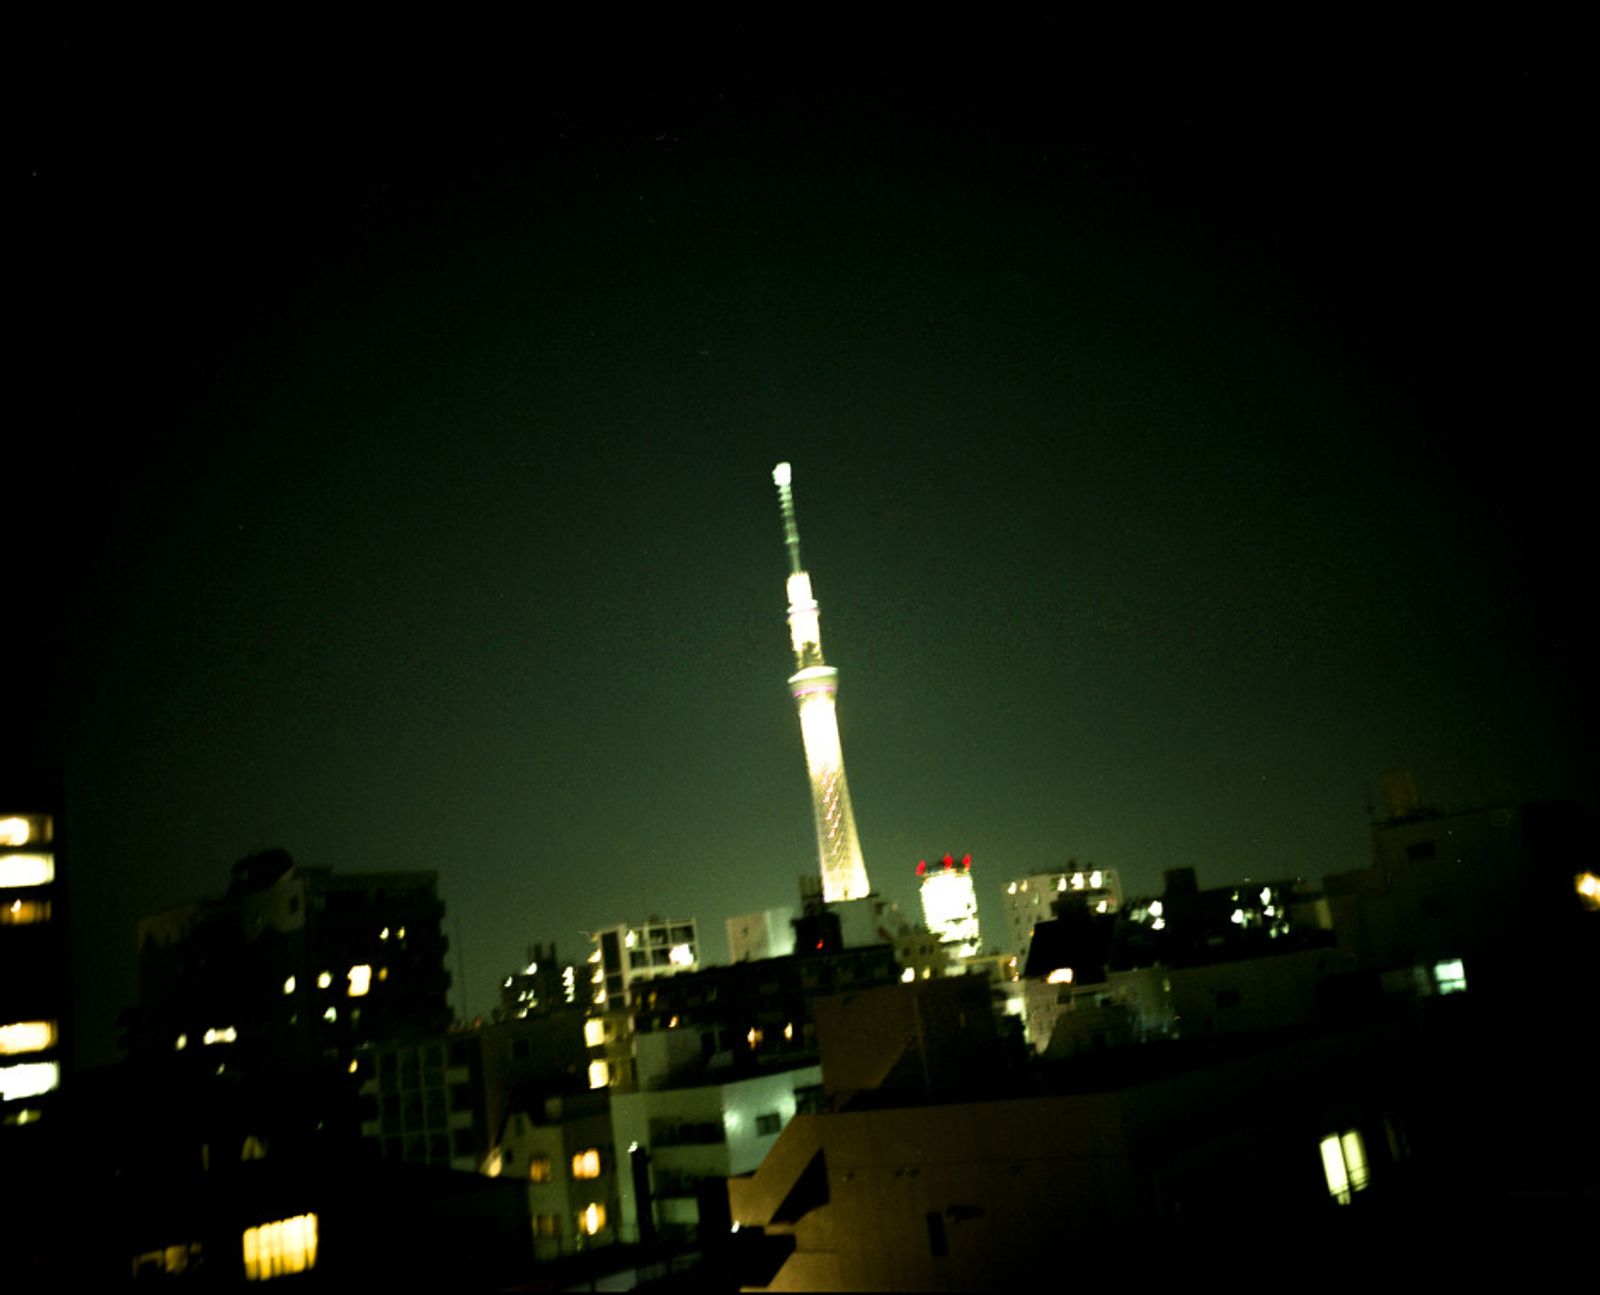 © Soichiro Koriyama - Image from the Apartments in Tokyo  photography project